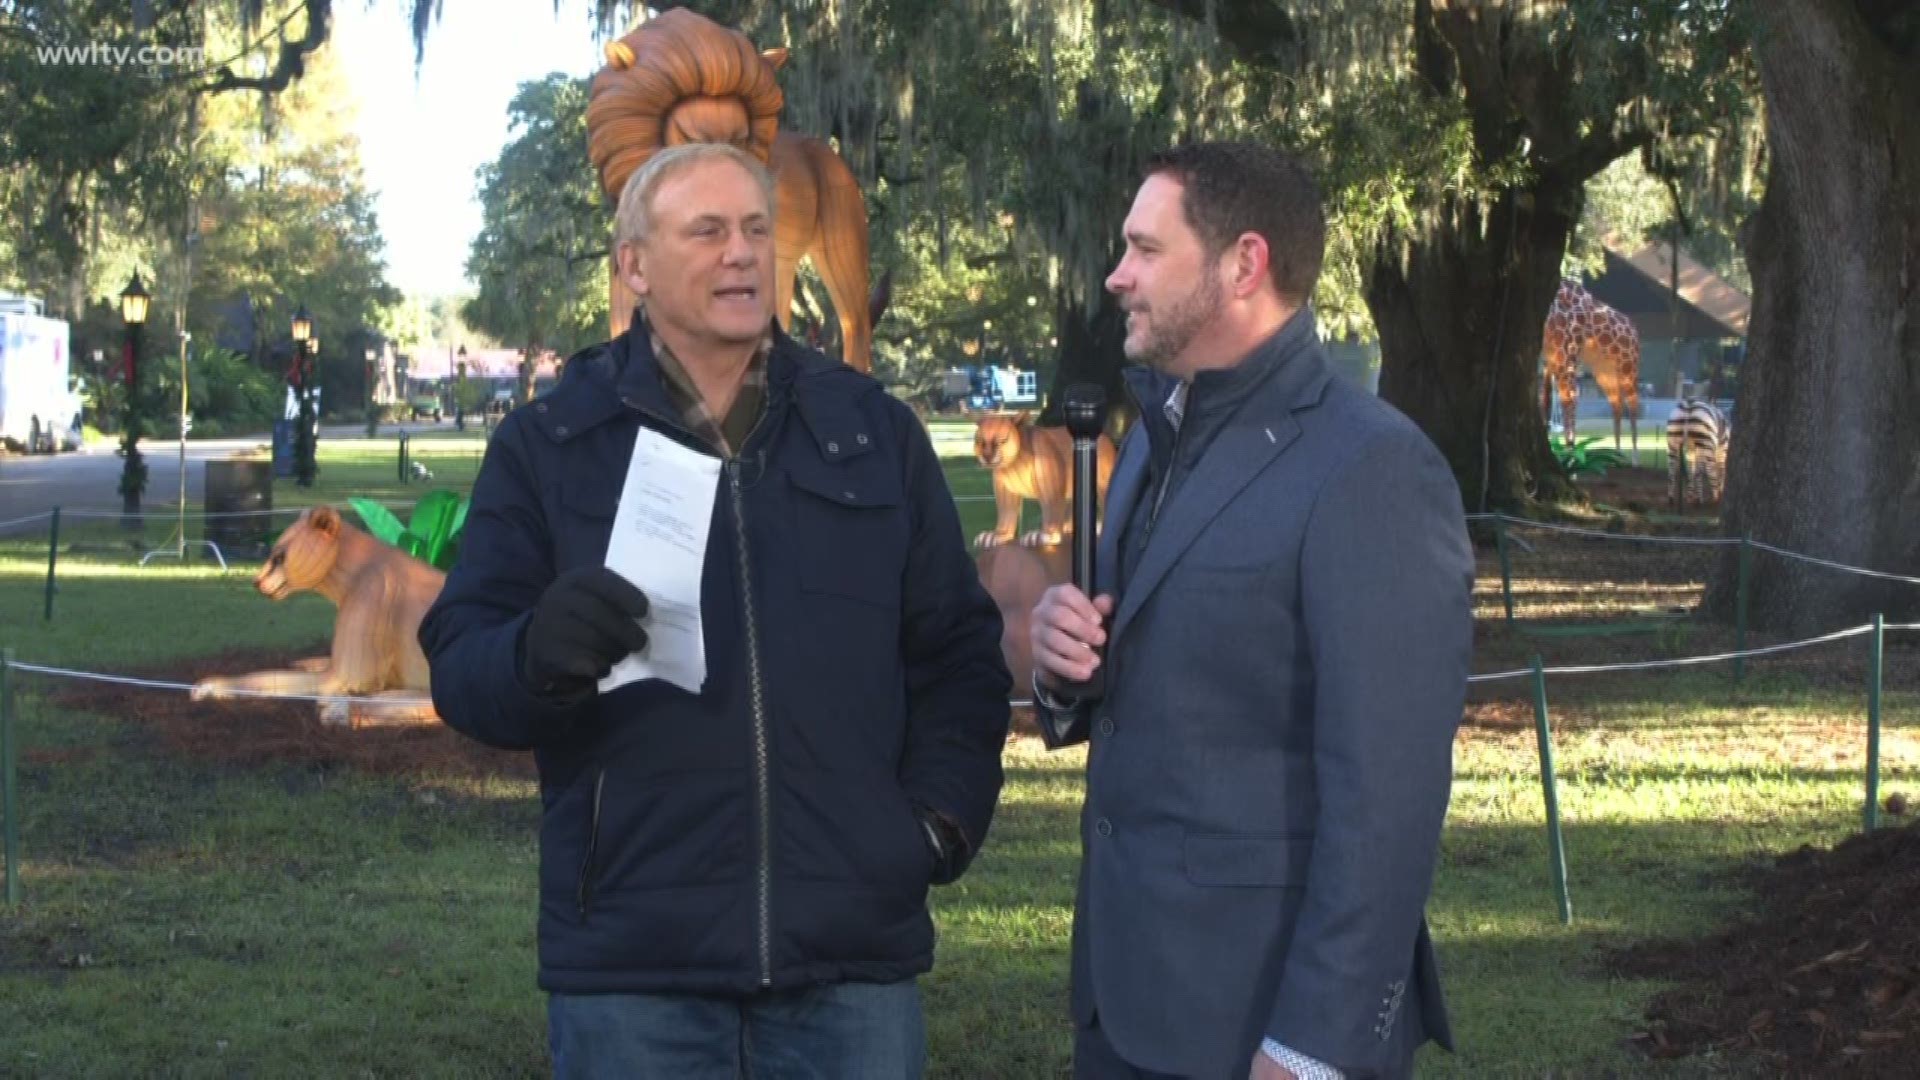 Children's Hospital is the presenting sponsor of Audubon Zoo Lights. President & John Nickens discusses the event and the hospital's partnership.